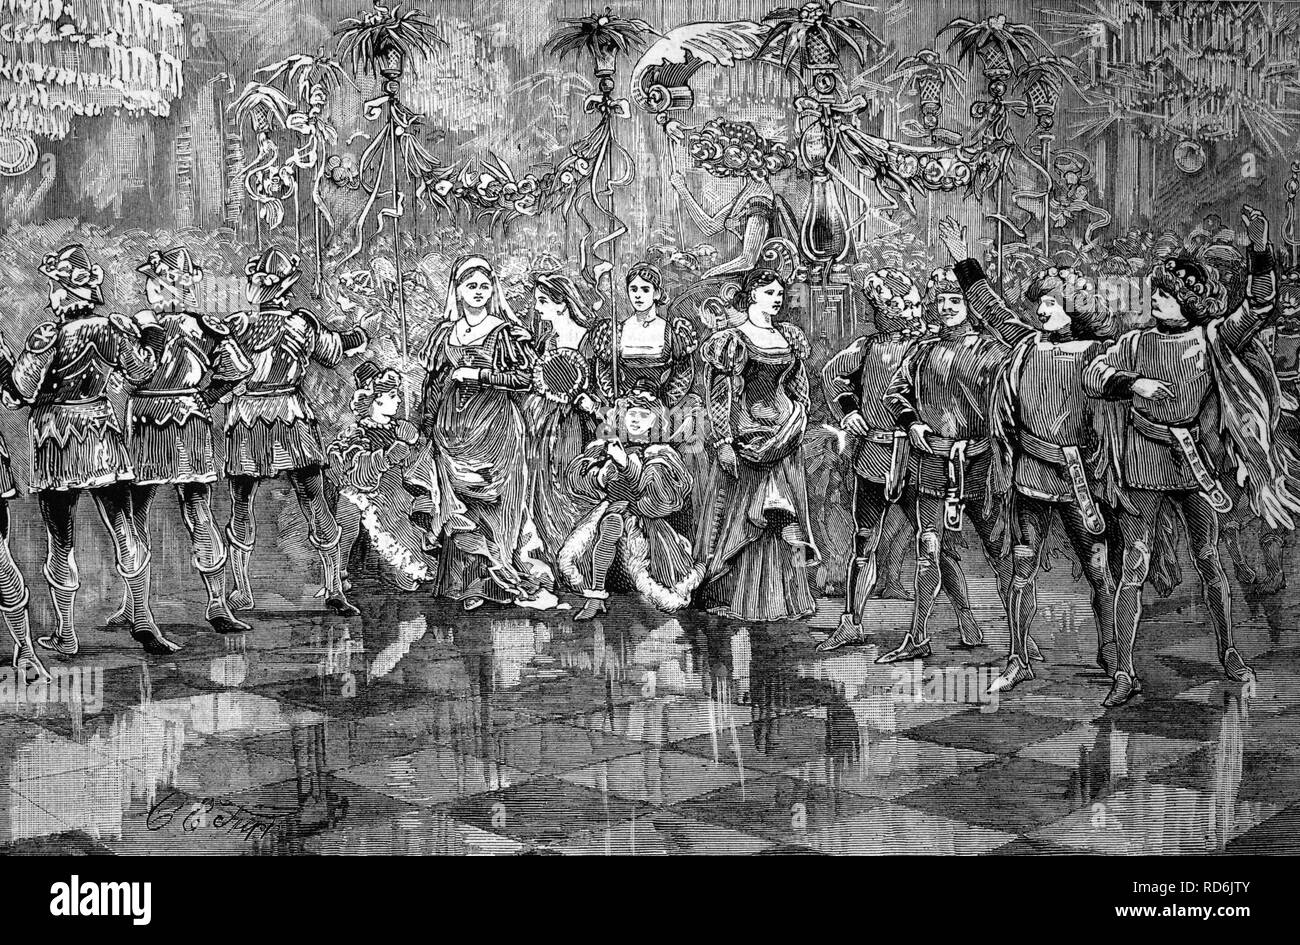 The Minne Dance, at the silver wedding of the Imperial prince and princess of Germany, historic image, 1883 Stock Photo